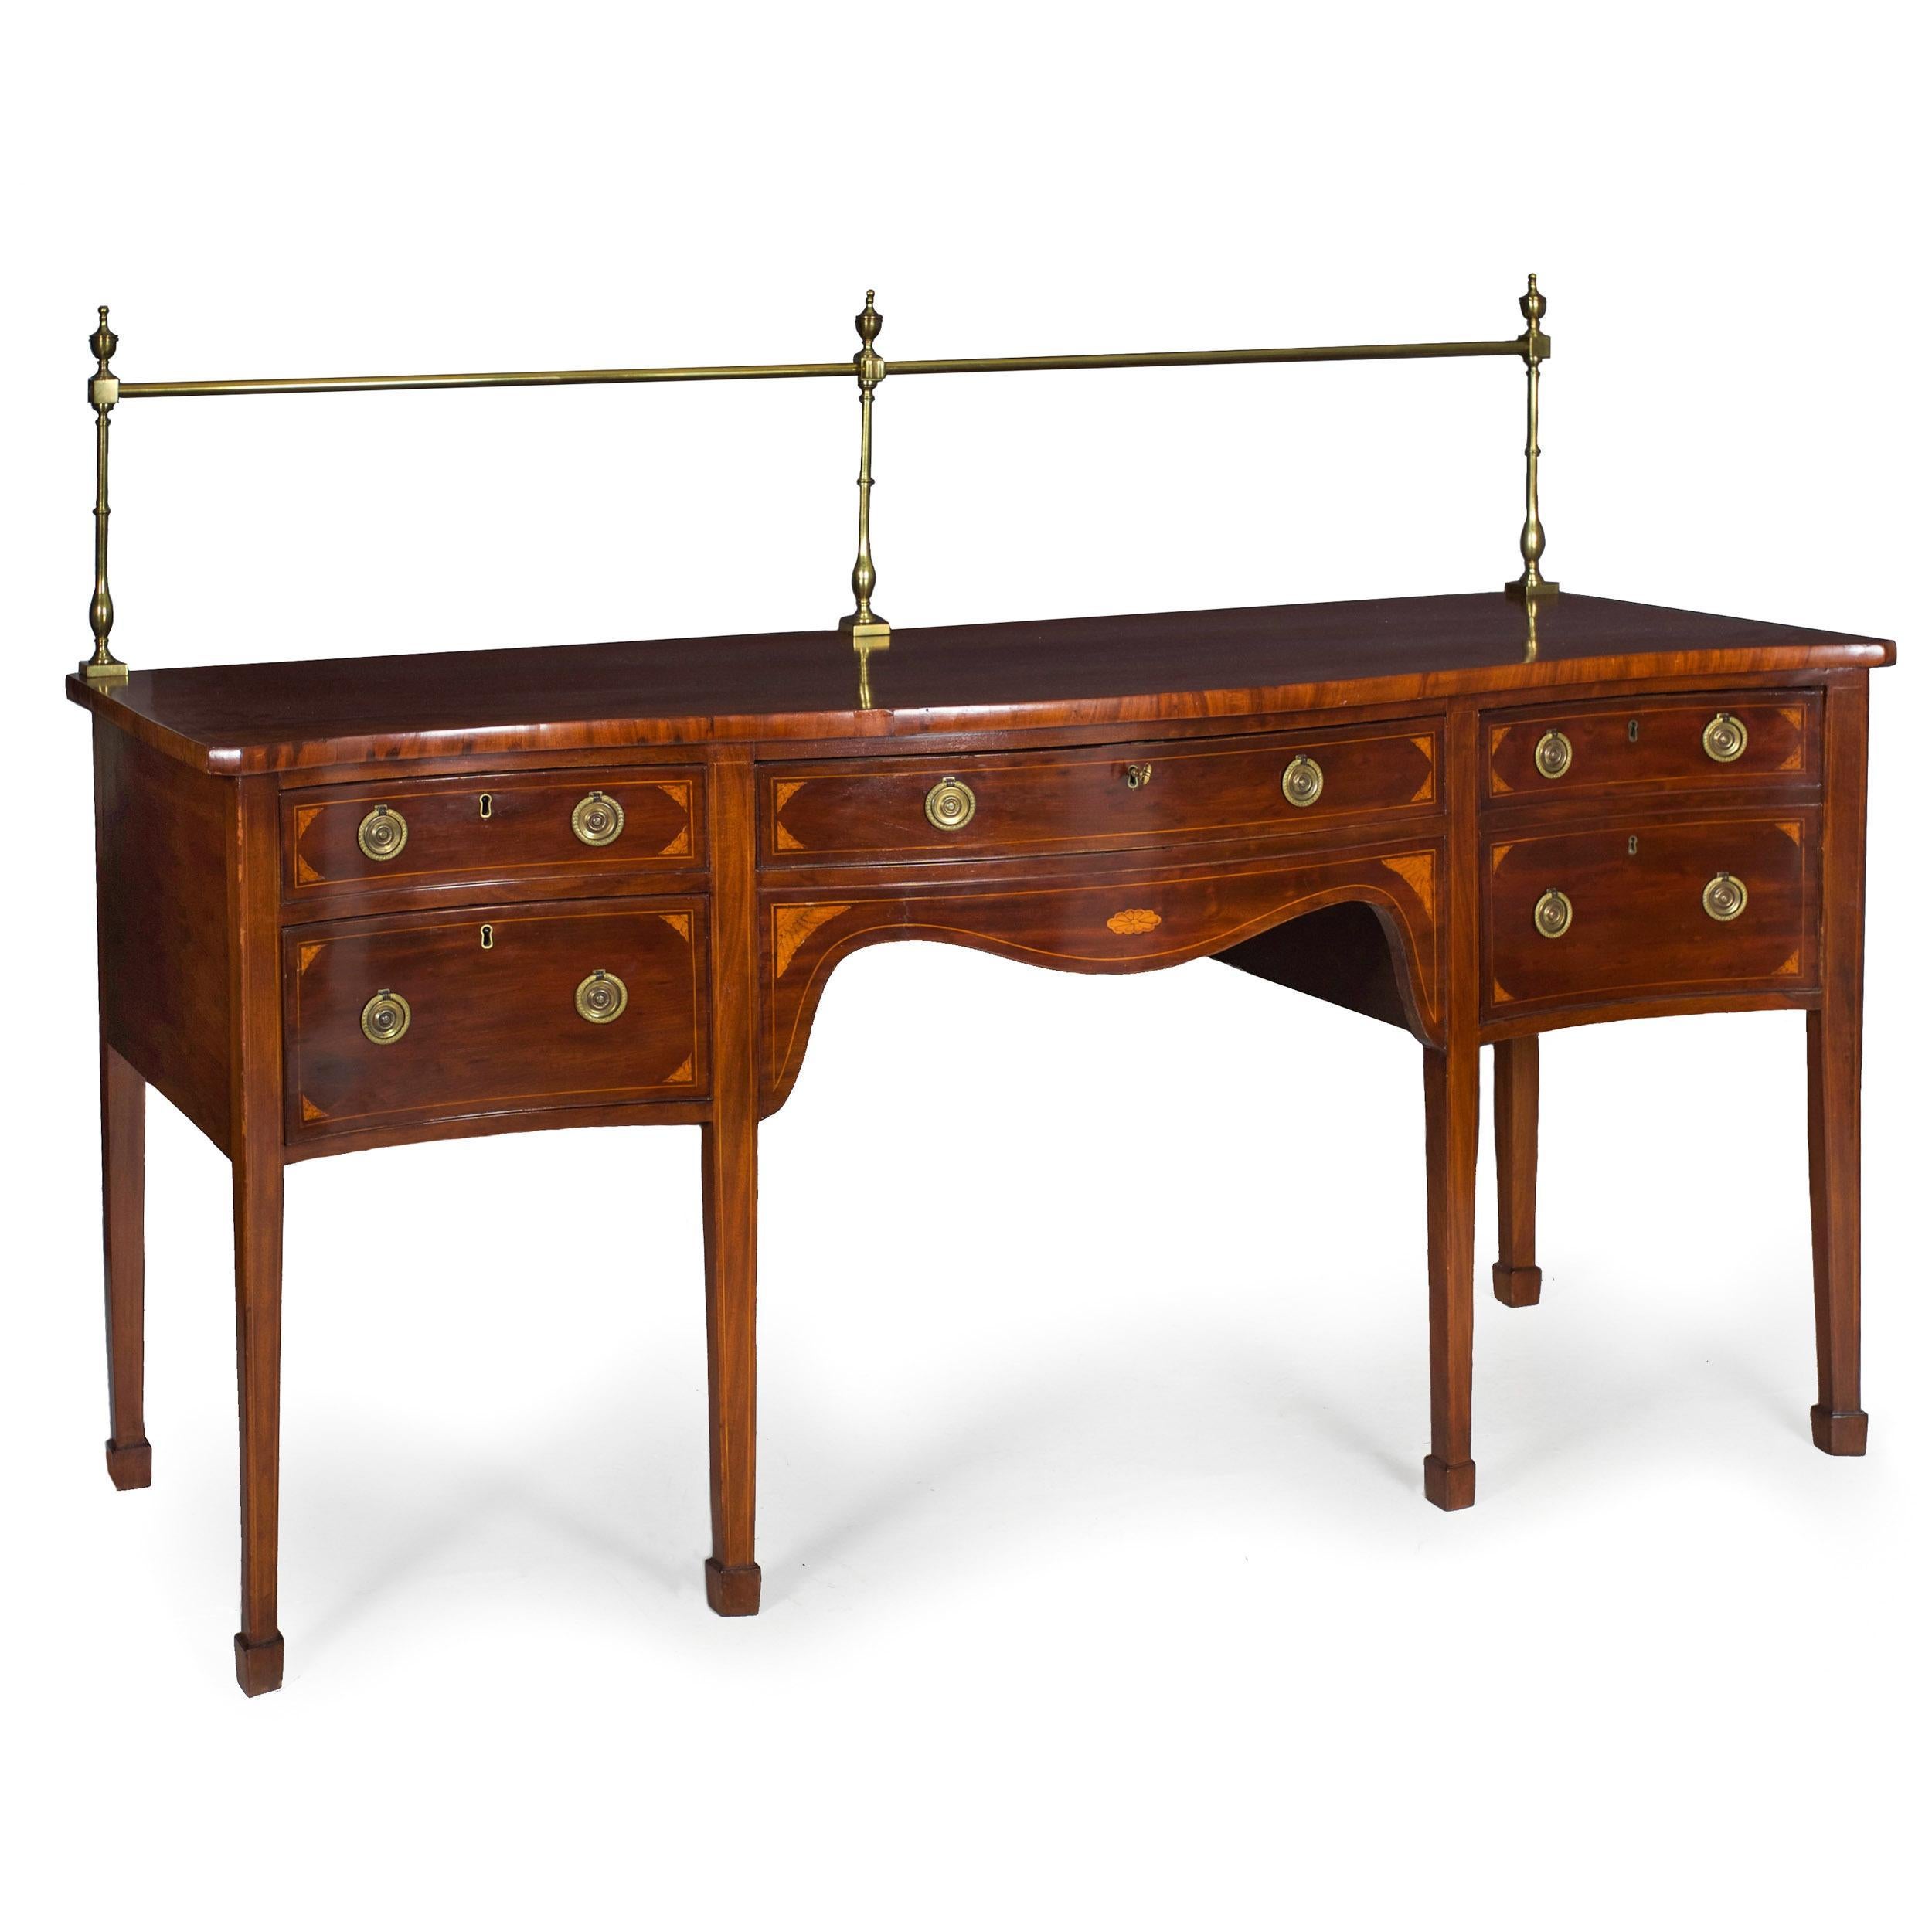 A good 19th century sideboard in the George III style with rich and beautifully patinated mahogany veneers throughout augmented with lovely inlaid satinwood spandrels and panels, it features a delicate serpentine form with a matching serpentine